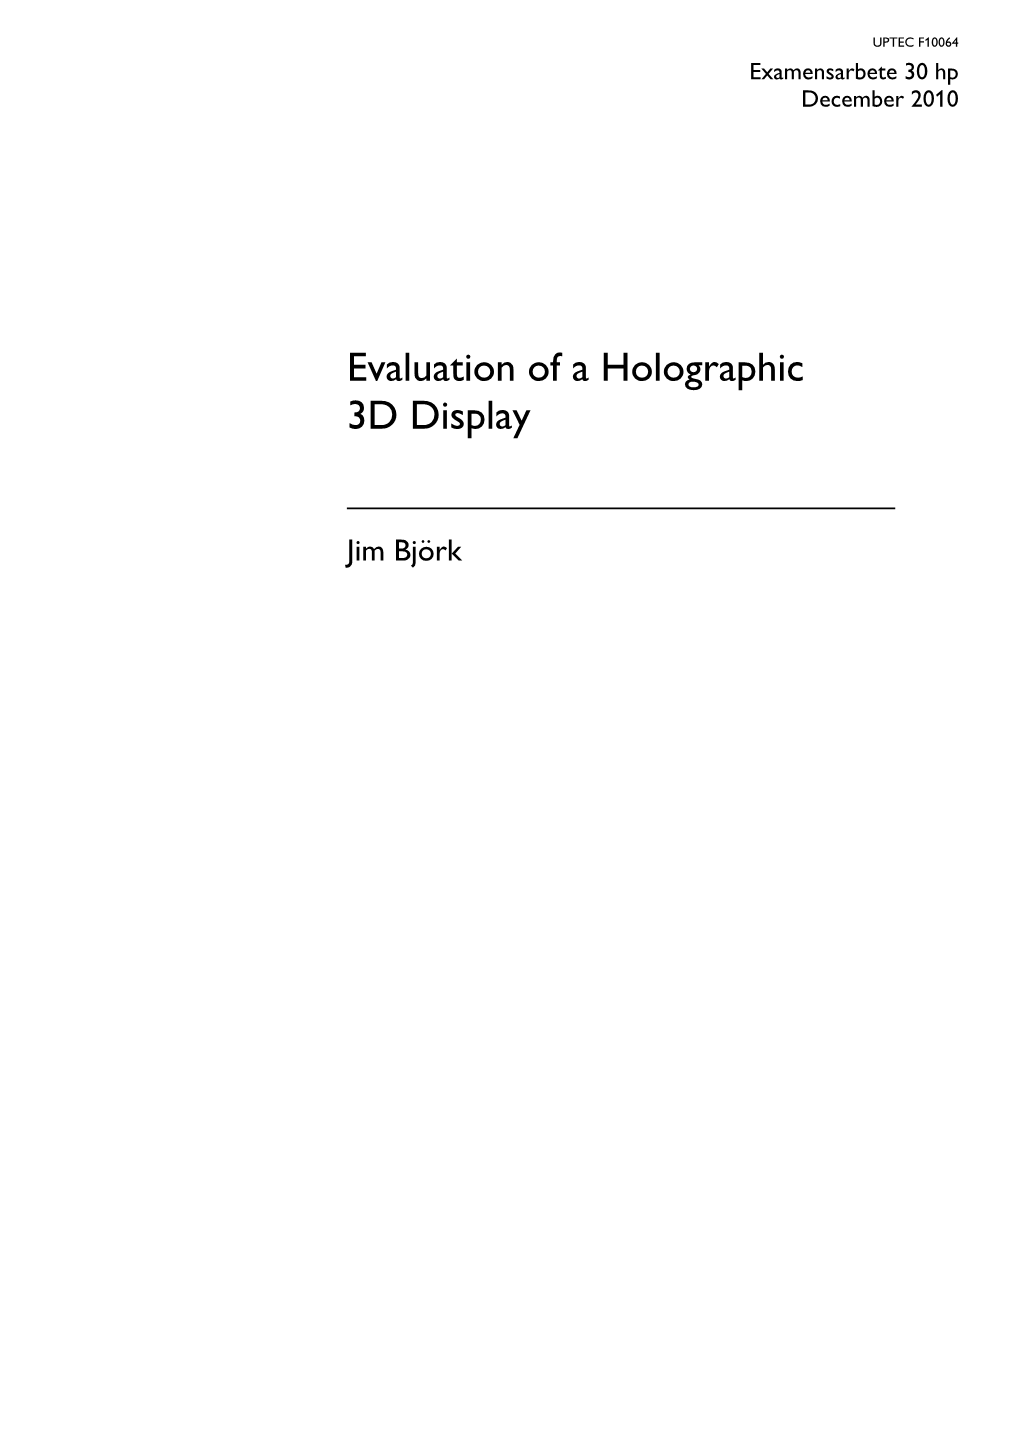 Evaluation of a Holographic 3D Display